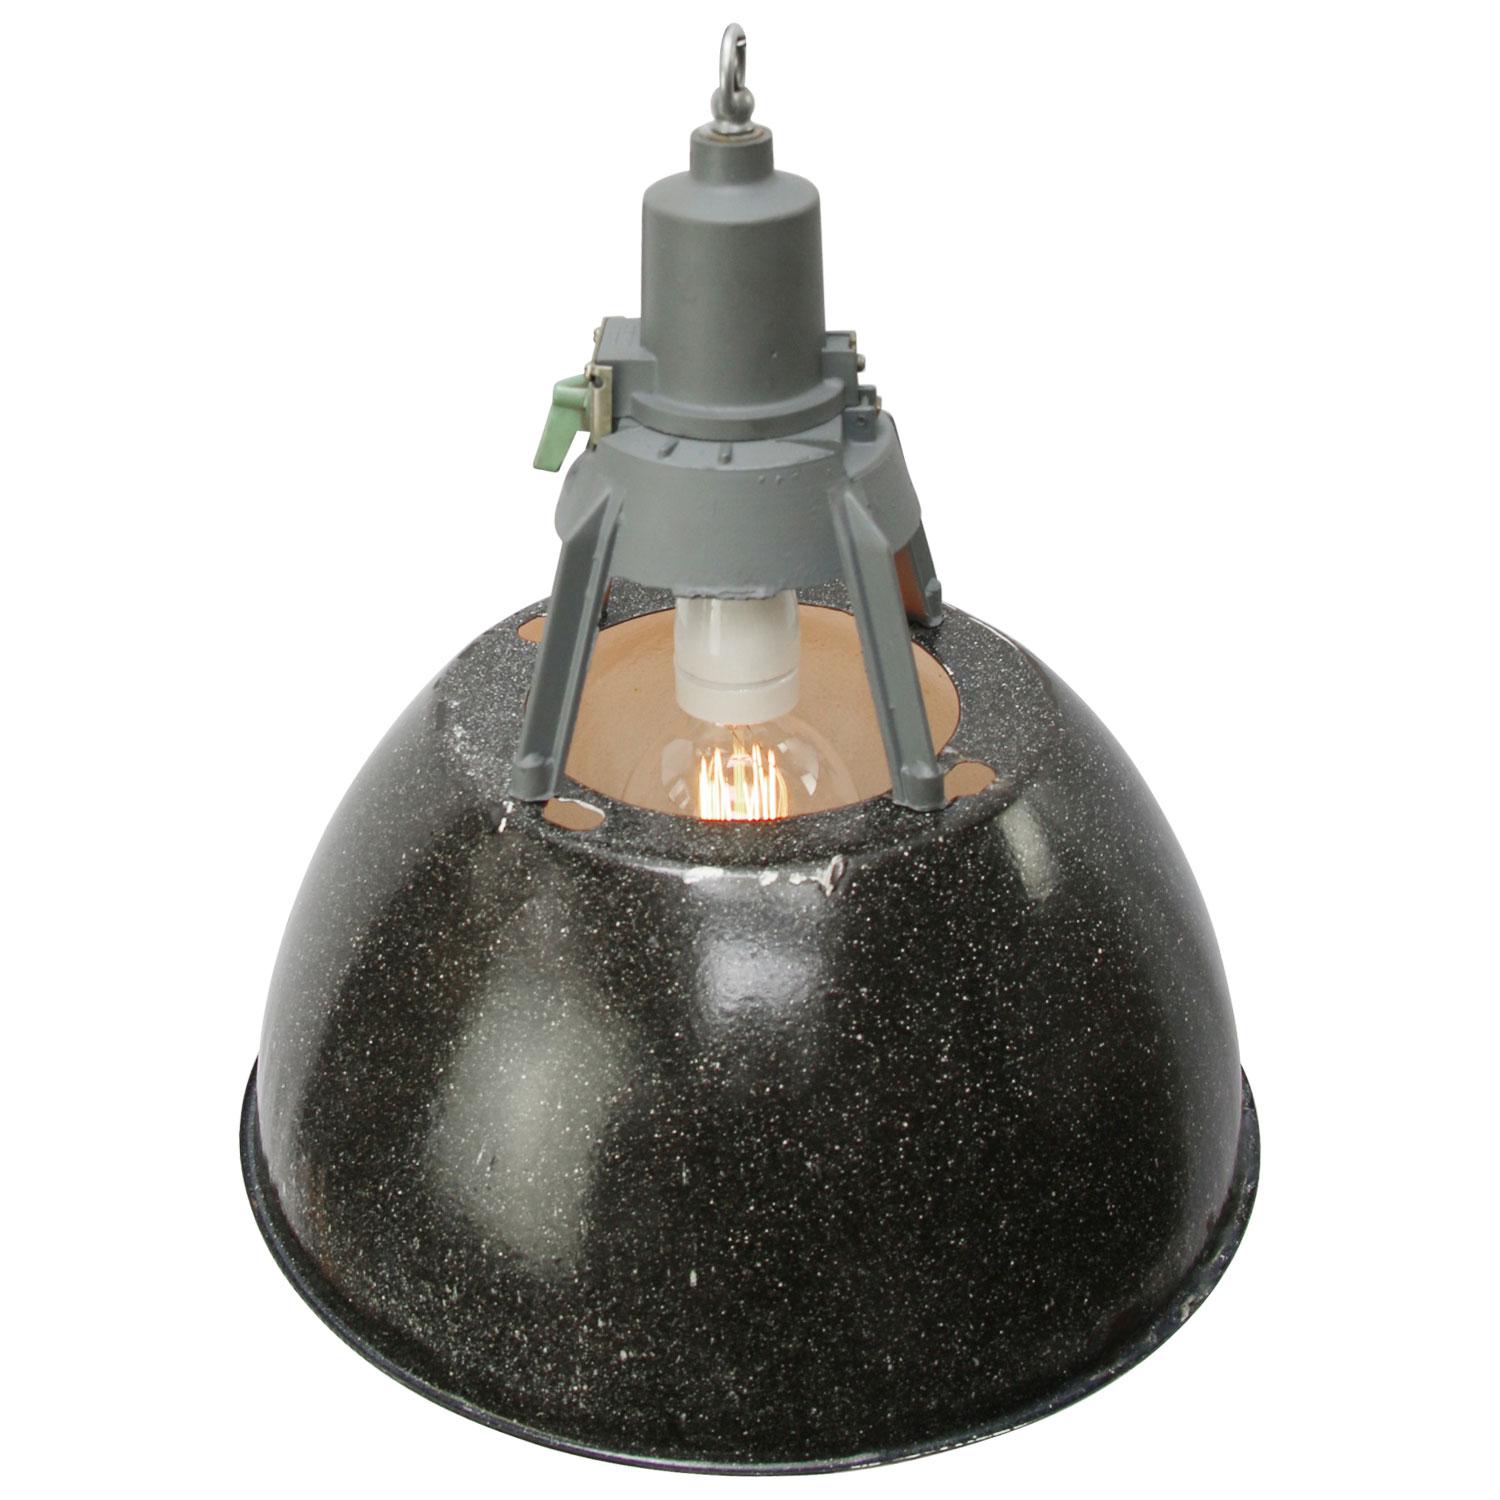 Enamel Industrial pendant.
Black enamel shade, white inside.
Dark grey cast aluminum top.

Weight: 2.90 kg / 6.4 lb

Priced per individual item. All lamps have been made suitable by international standards for incandescent light bulbs,